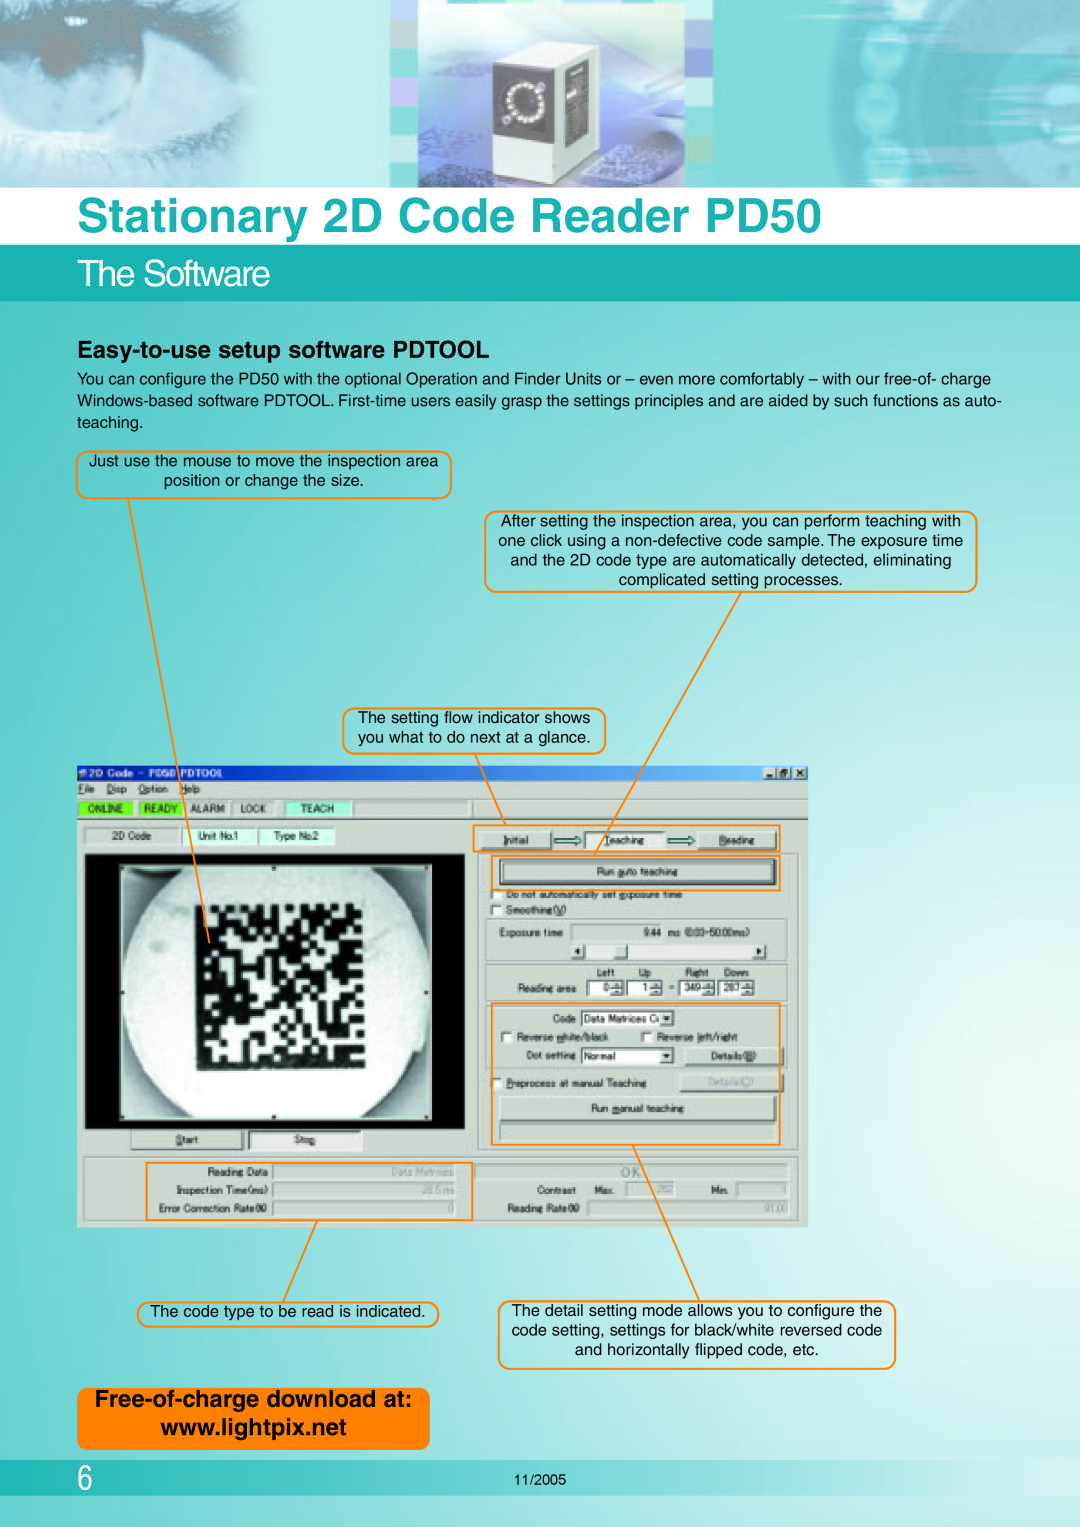 Panasonic The Software, Easy-to-use setup software PDTOOL, Free-of-charge download at, Stationary 2D Code Reader PD50 